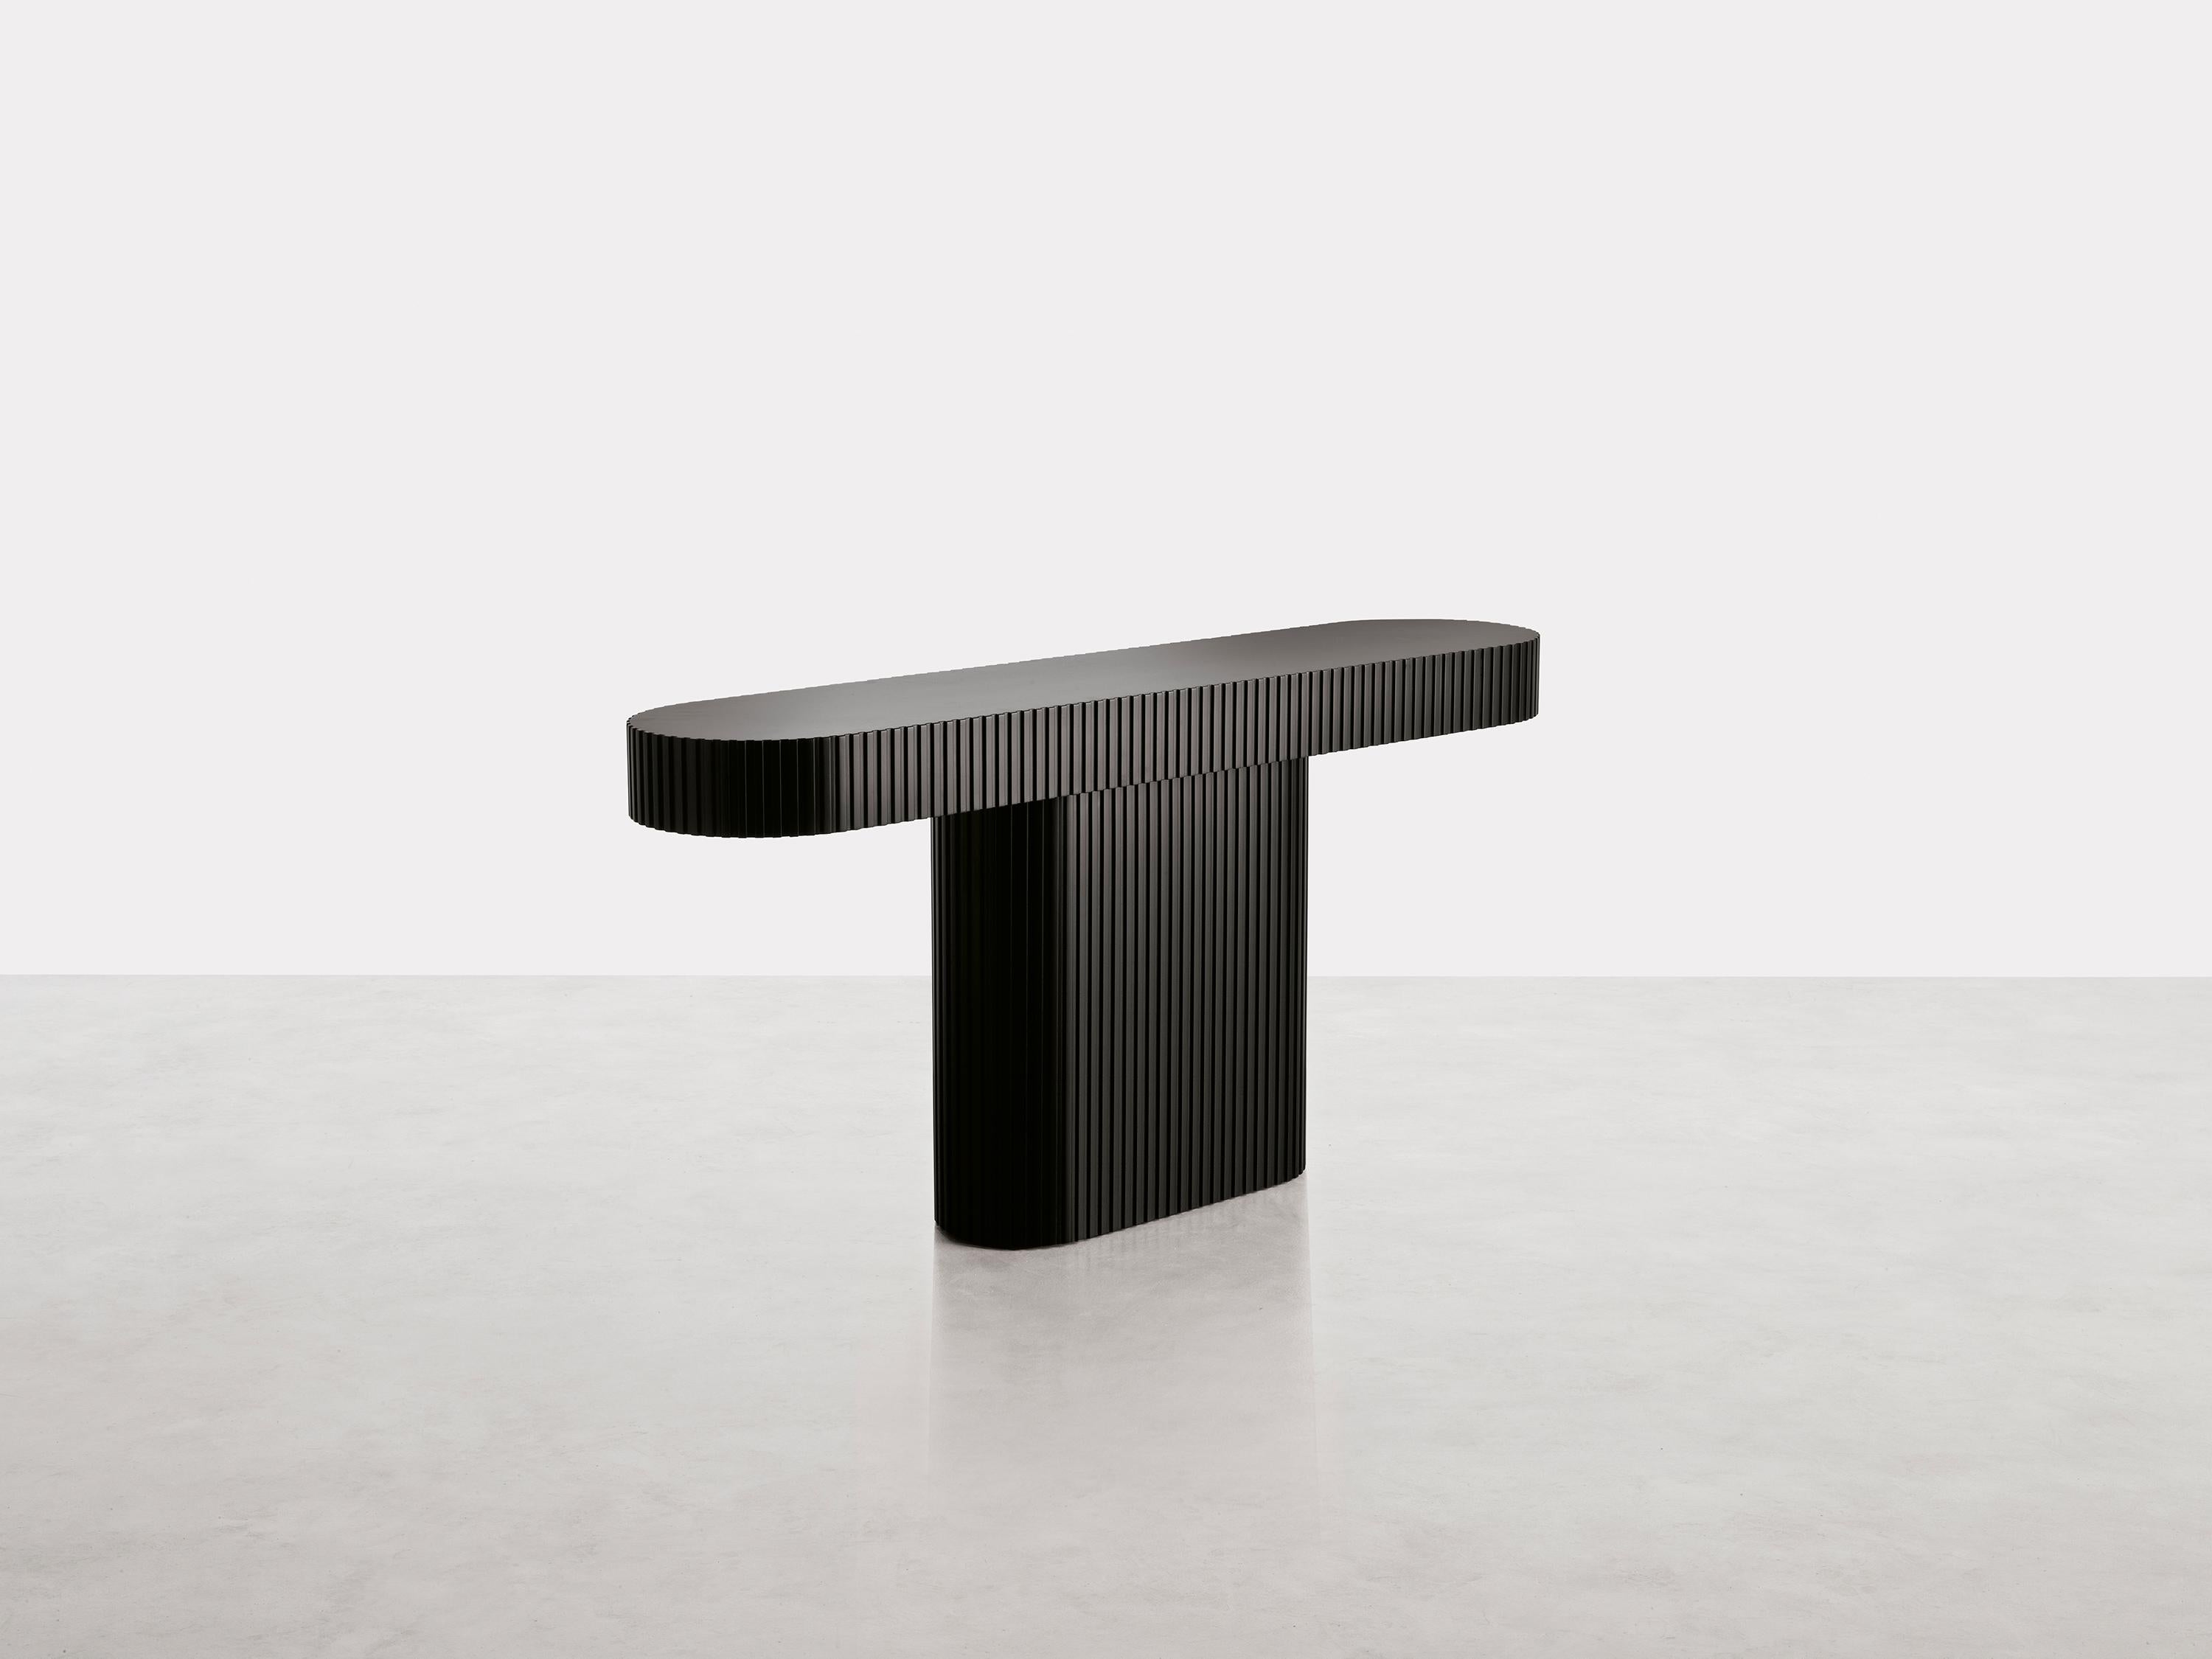 The unique notched surface refers to the image of the pipe organ. The musical reference-which is echoed in
the project's name-evokes an idea of lightness. The volume of the console finds itself lightened by the
repeated gesture of this threading,